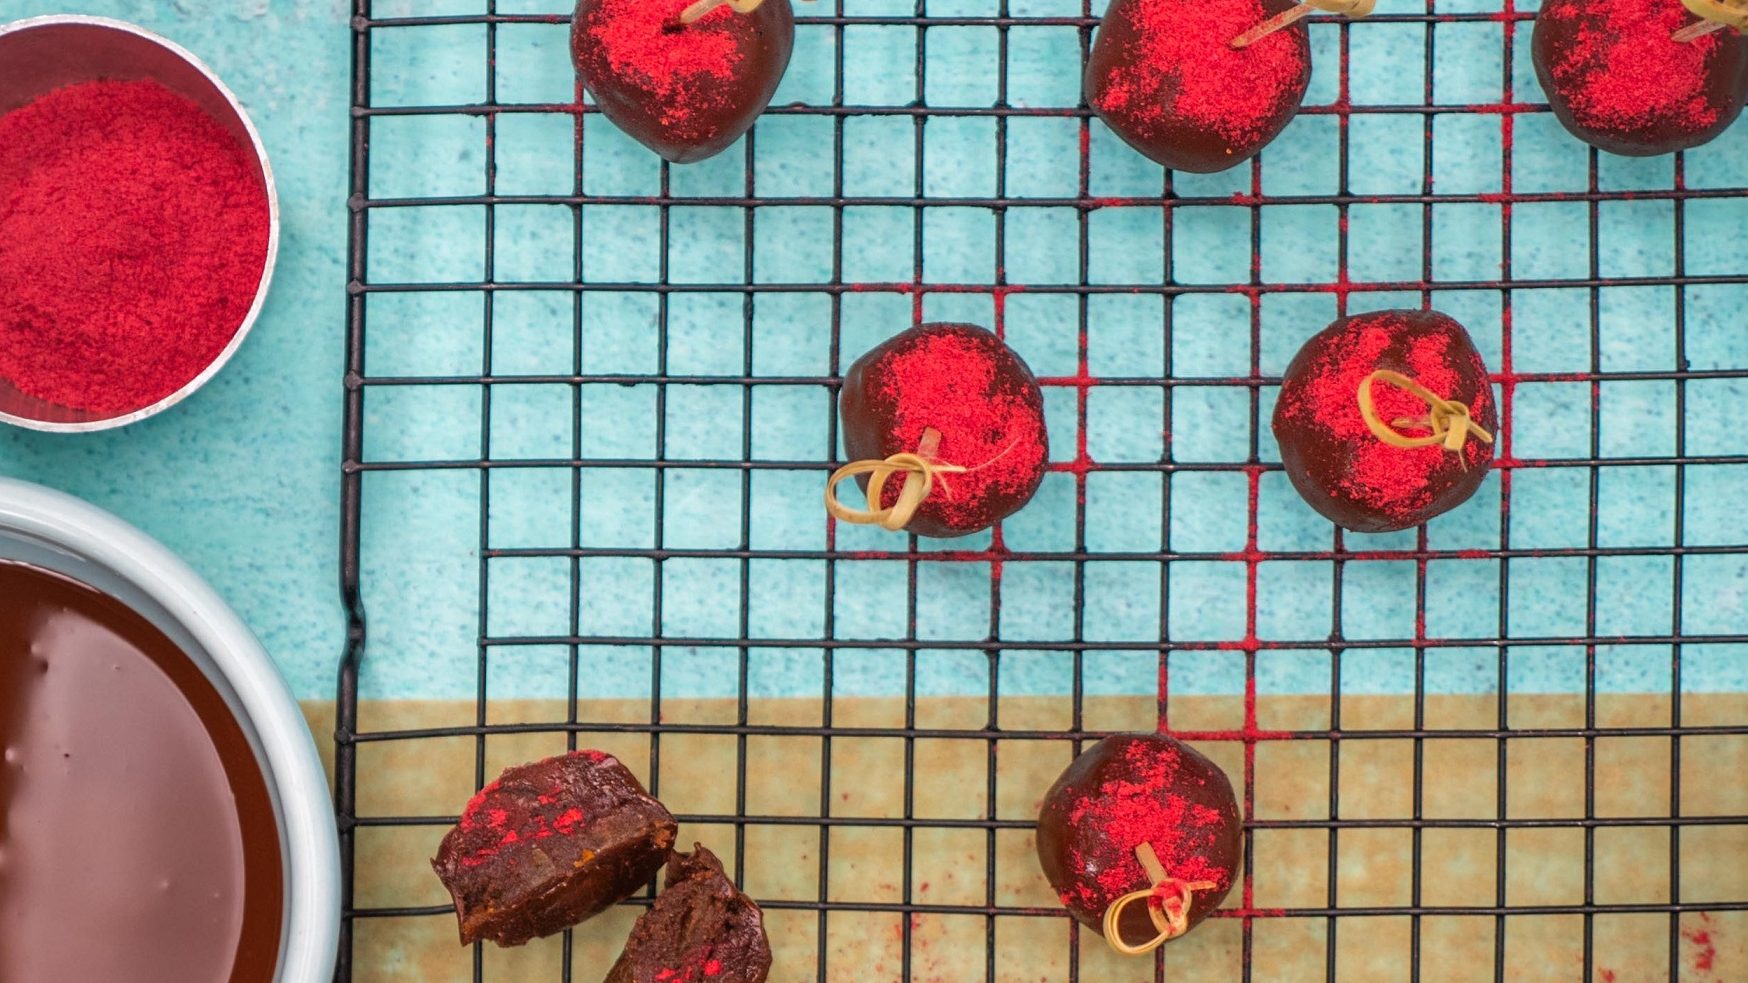 Chocolate pops covered in freeze-dried raspberry powder